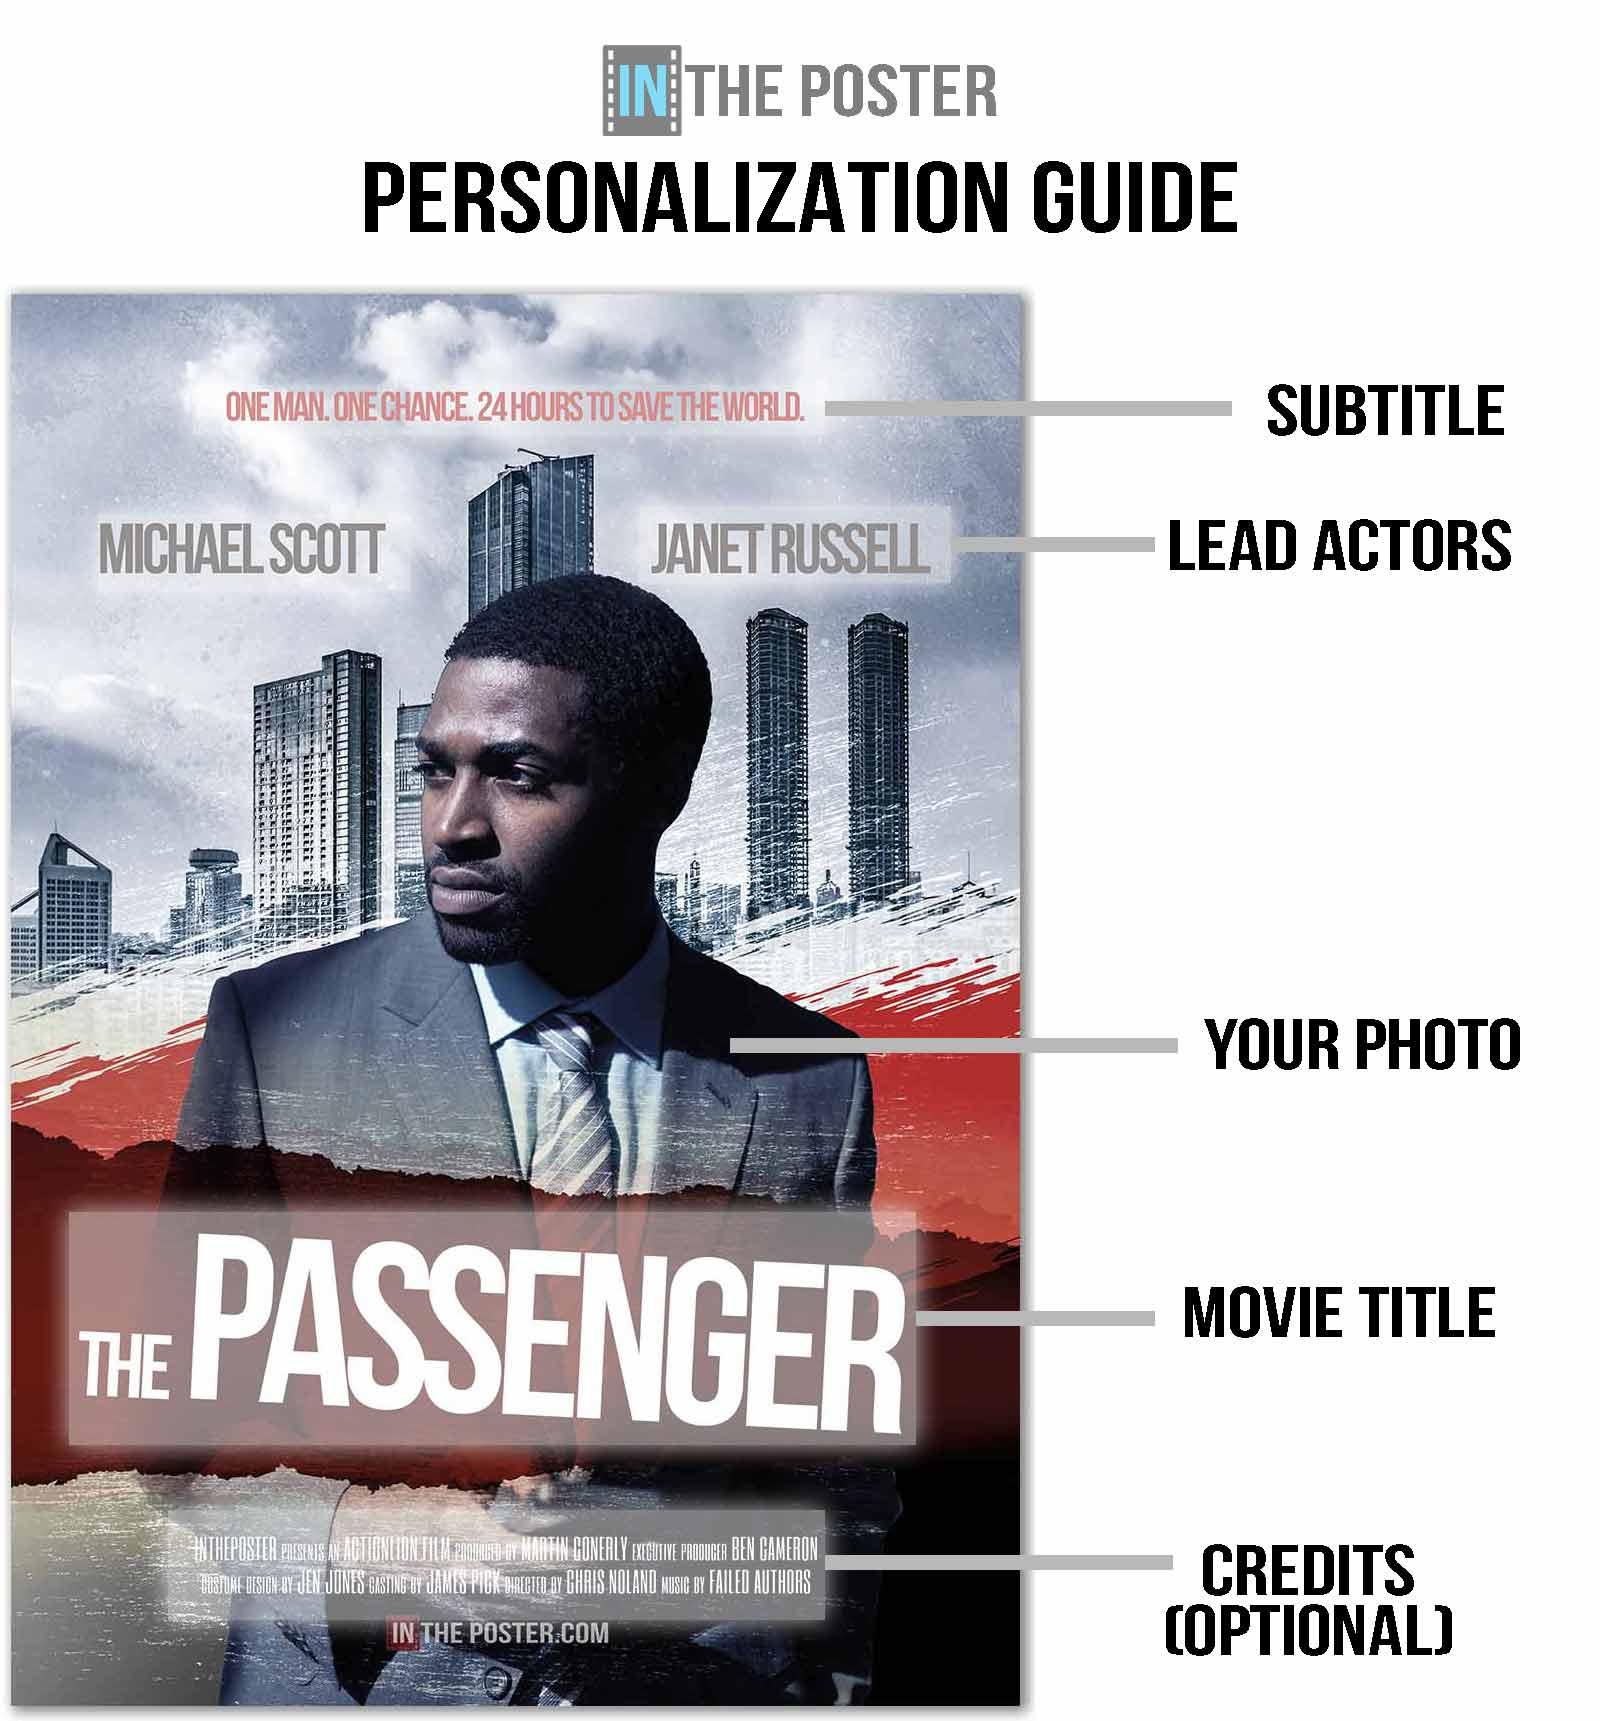 A thriller movie poster diagram showing how to personalize the movie poster